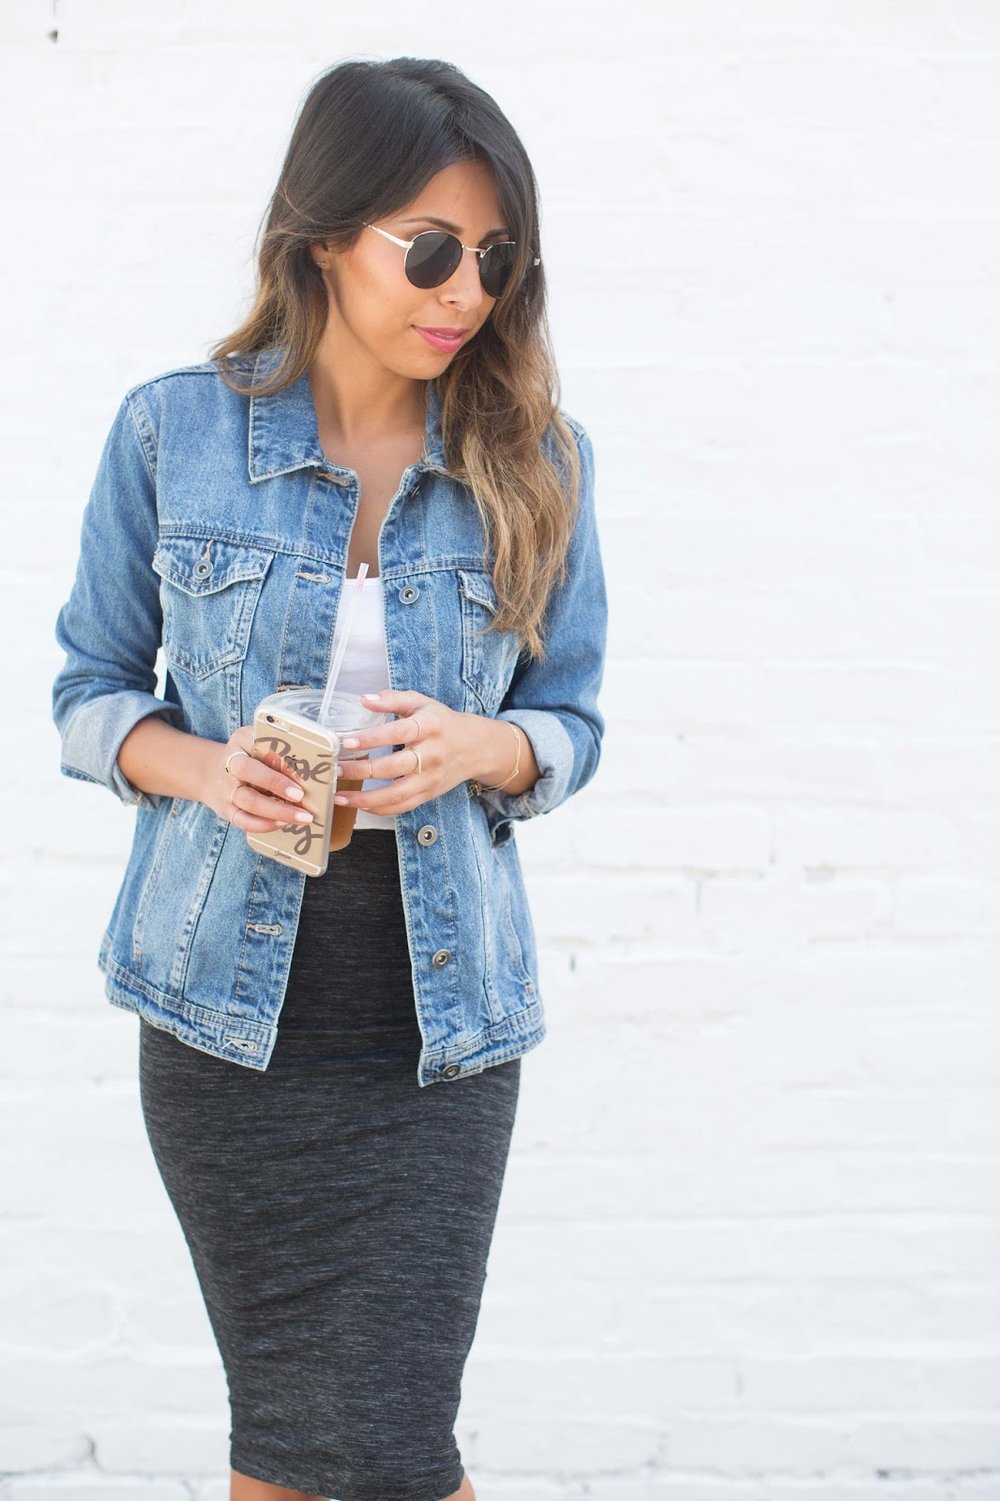 how to wear denim jacket, how to wear tennis shoes with skirts, casual weekend outfit ideas